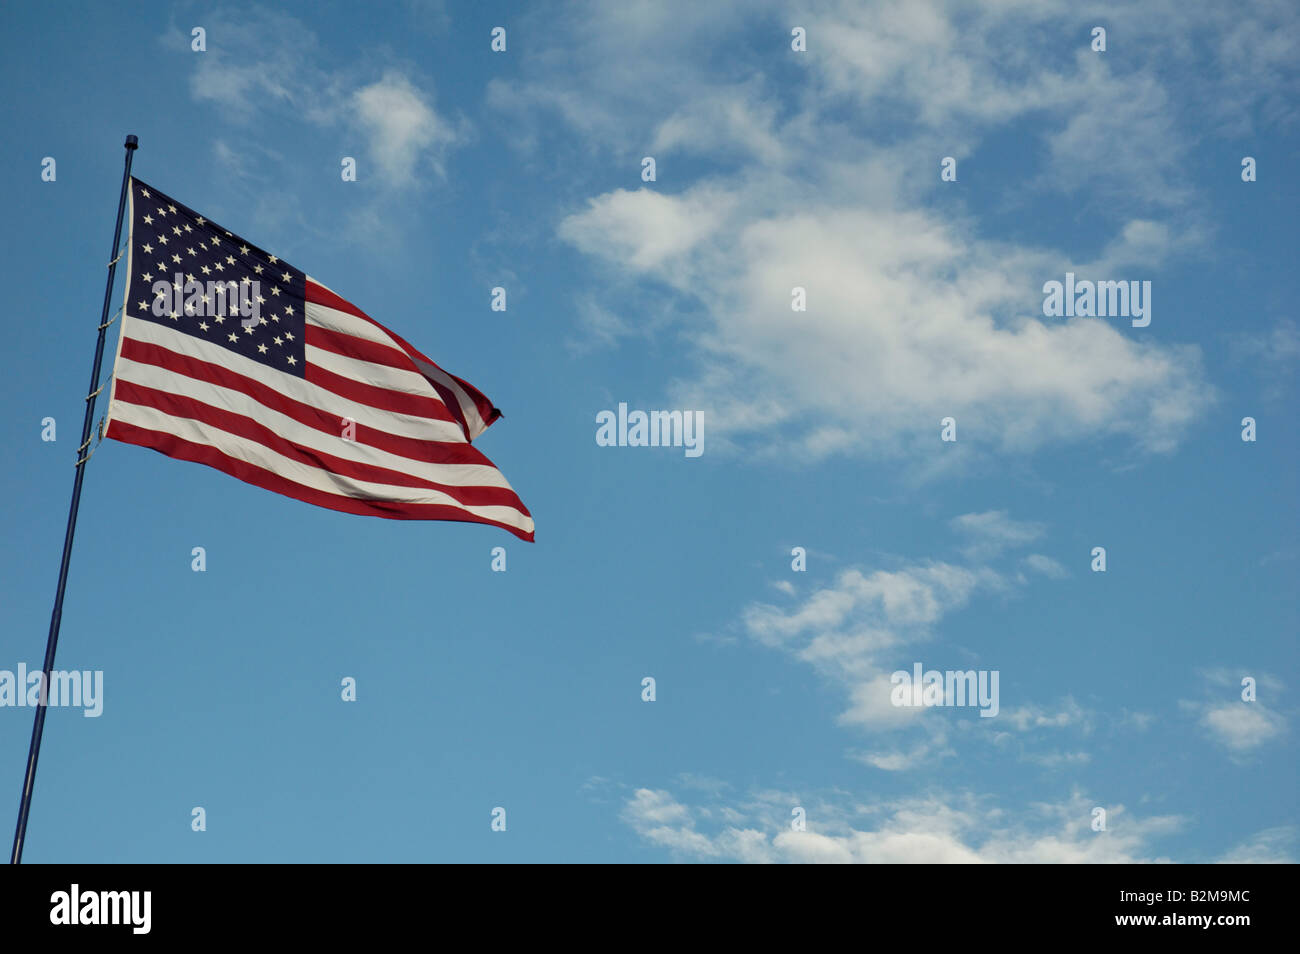 United states of America flag blowing in the wind with clouds and blue sky background Stock Photo